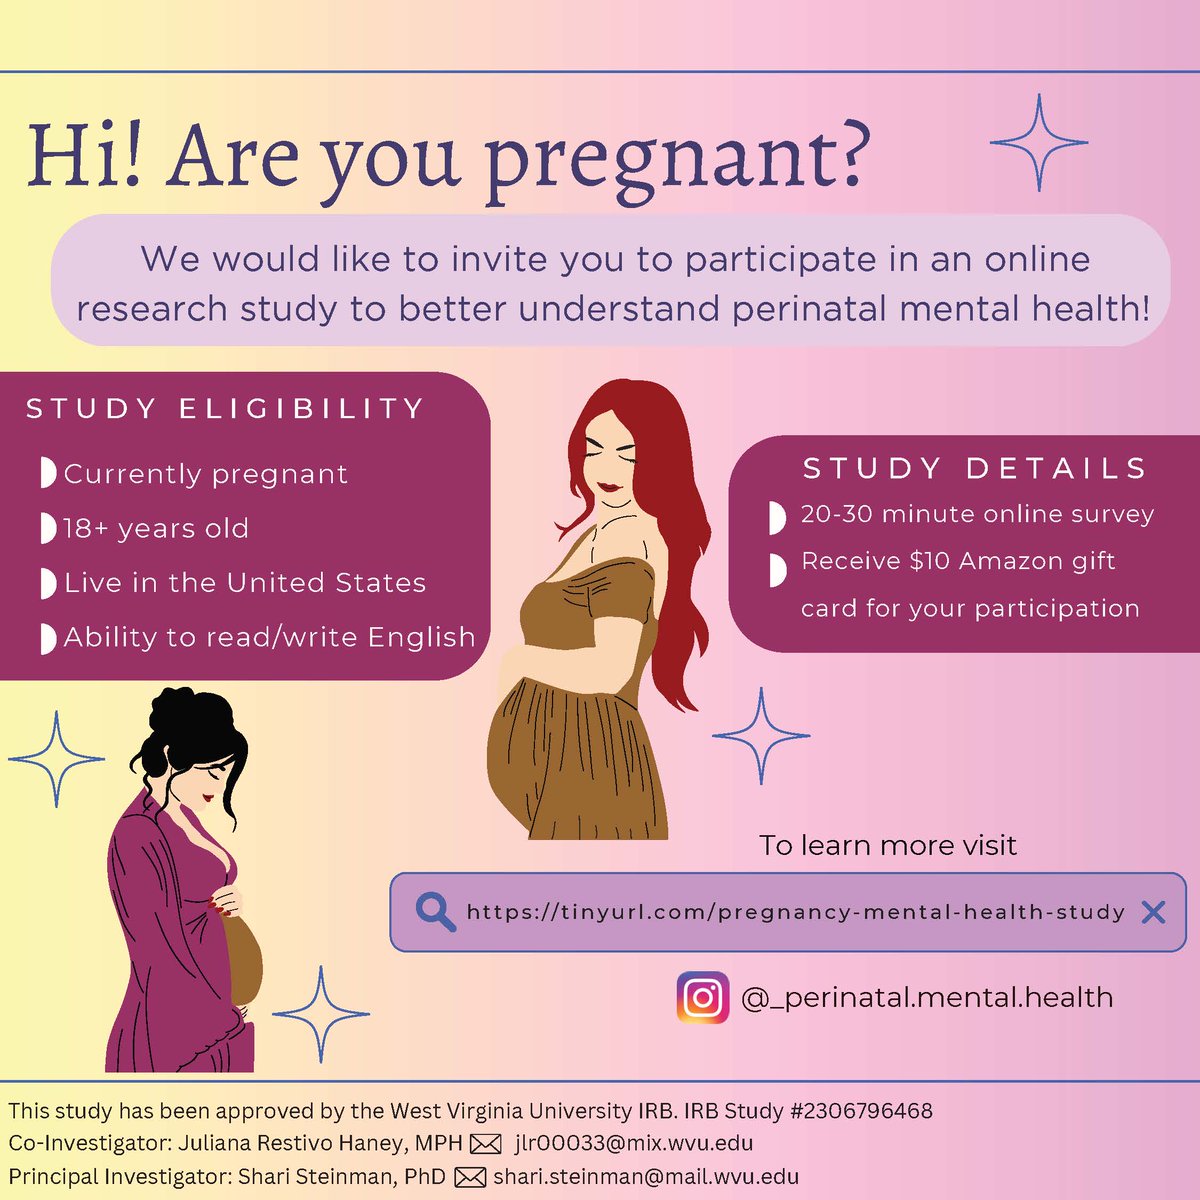 Please share our survey with your network! We are recruiting pregnant individuals to assess symptoms of anxiety, OCD, trauma during pregnancy. Visit wvu.qualtrics.com/jfe/form/SV_1Y… to complete the survey! #perinatalmentalhealth #perinatalresearch #postpartumdepression #postpartumocd